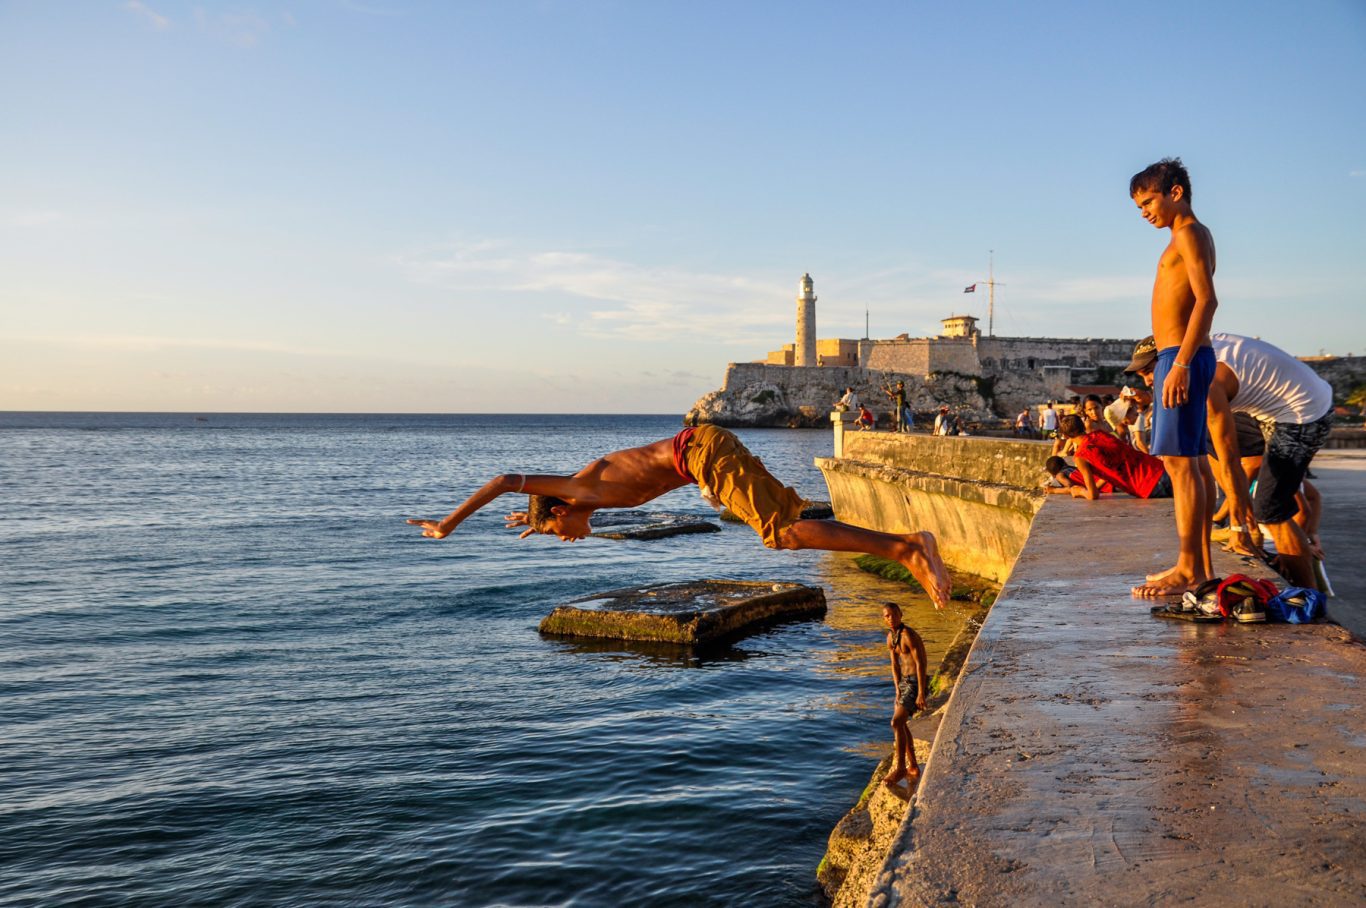 The bathers are part of the iconic image of the photographed Malecón boardwalk. Photo: Kaloian.